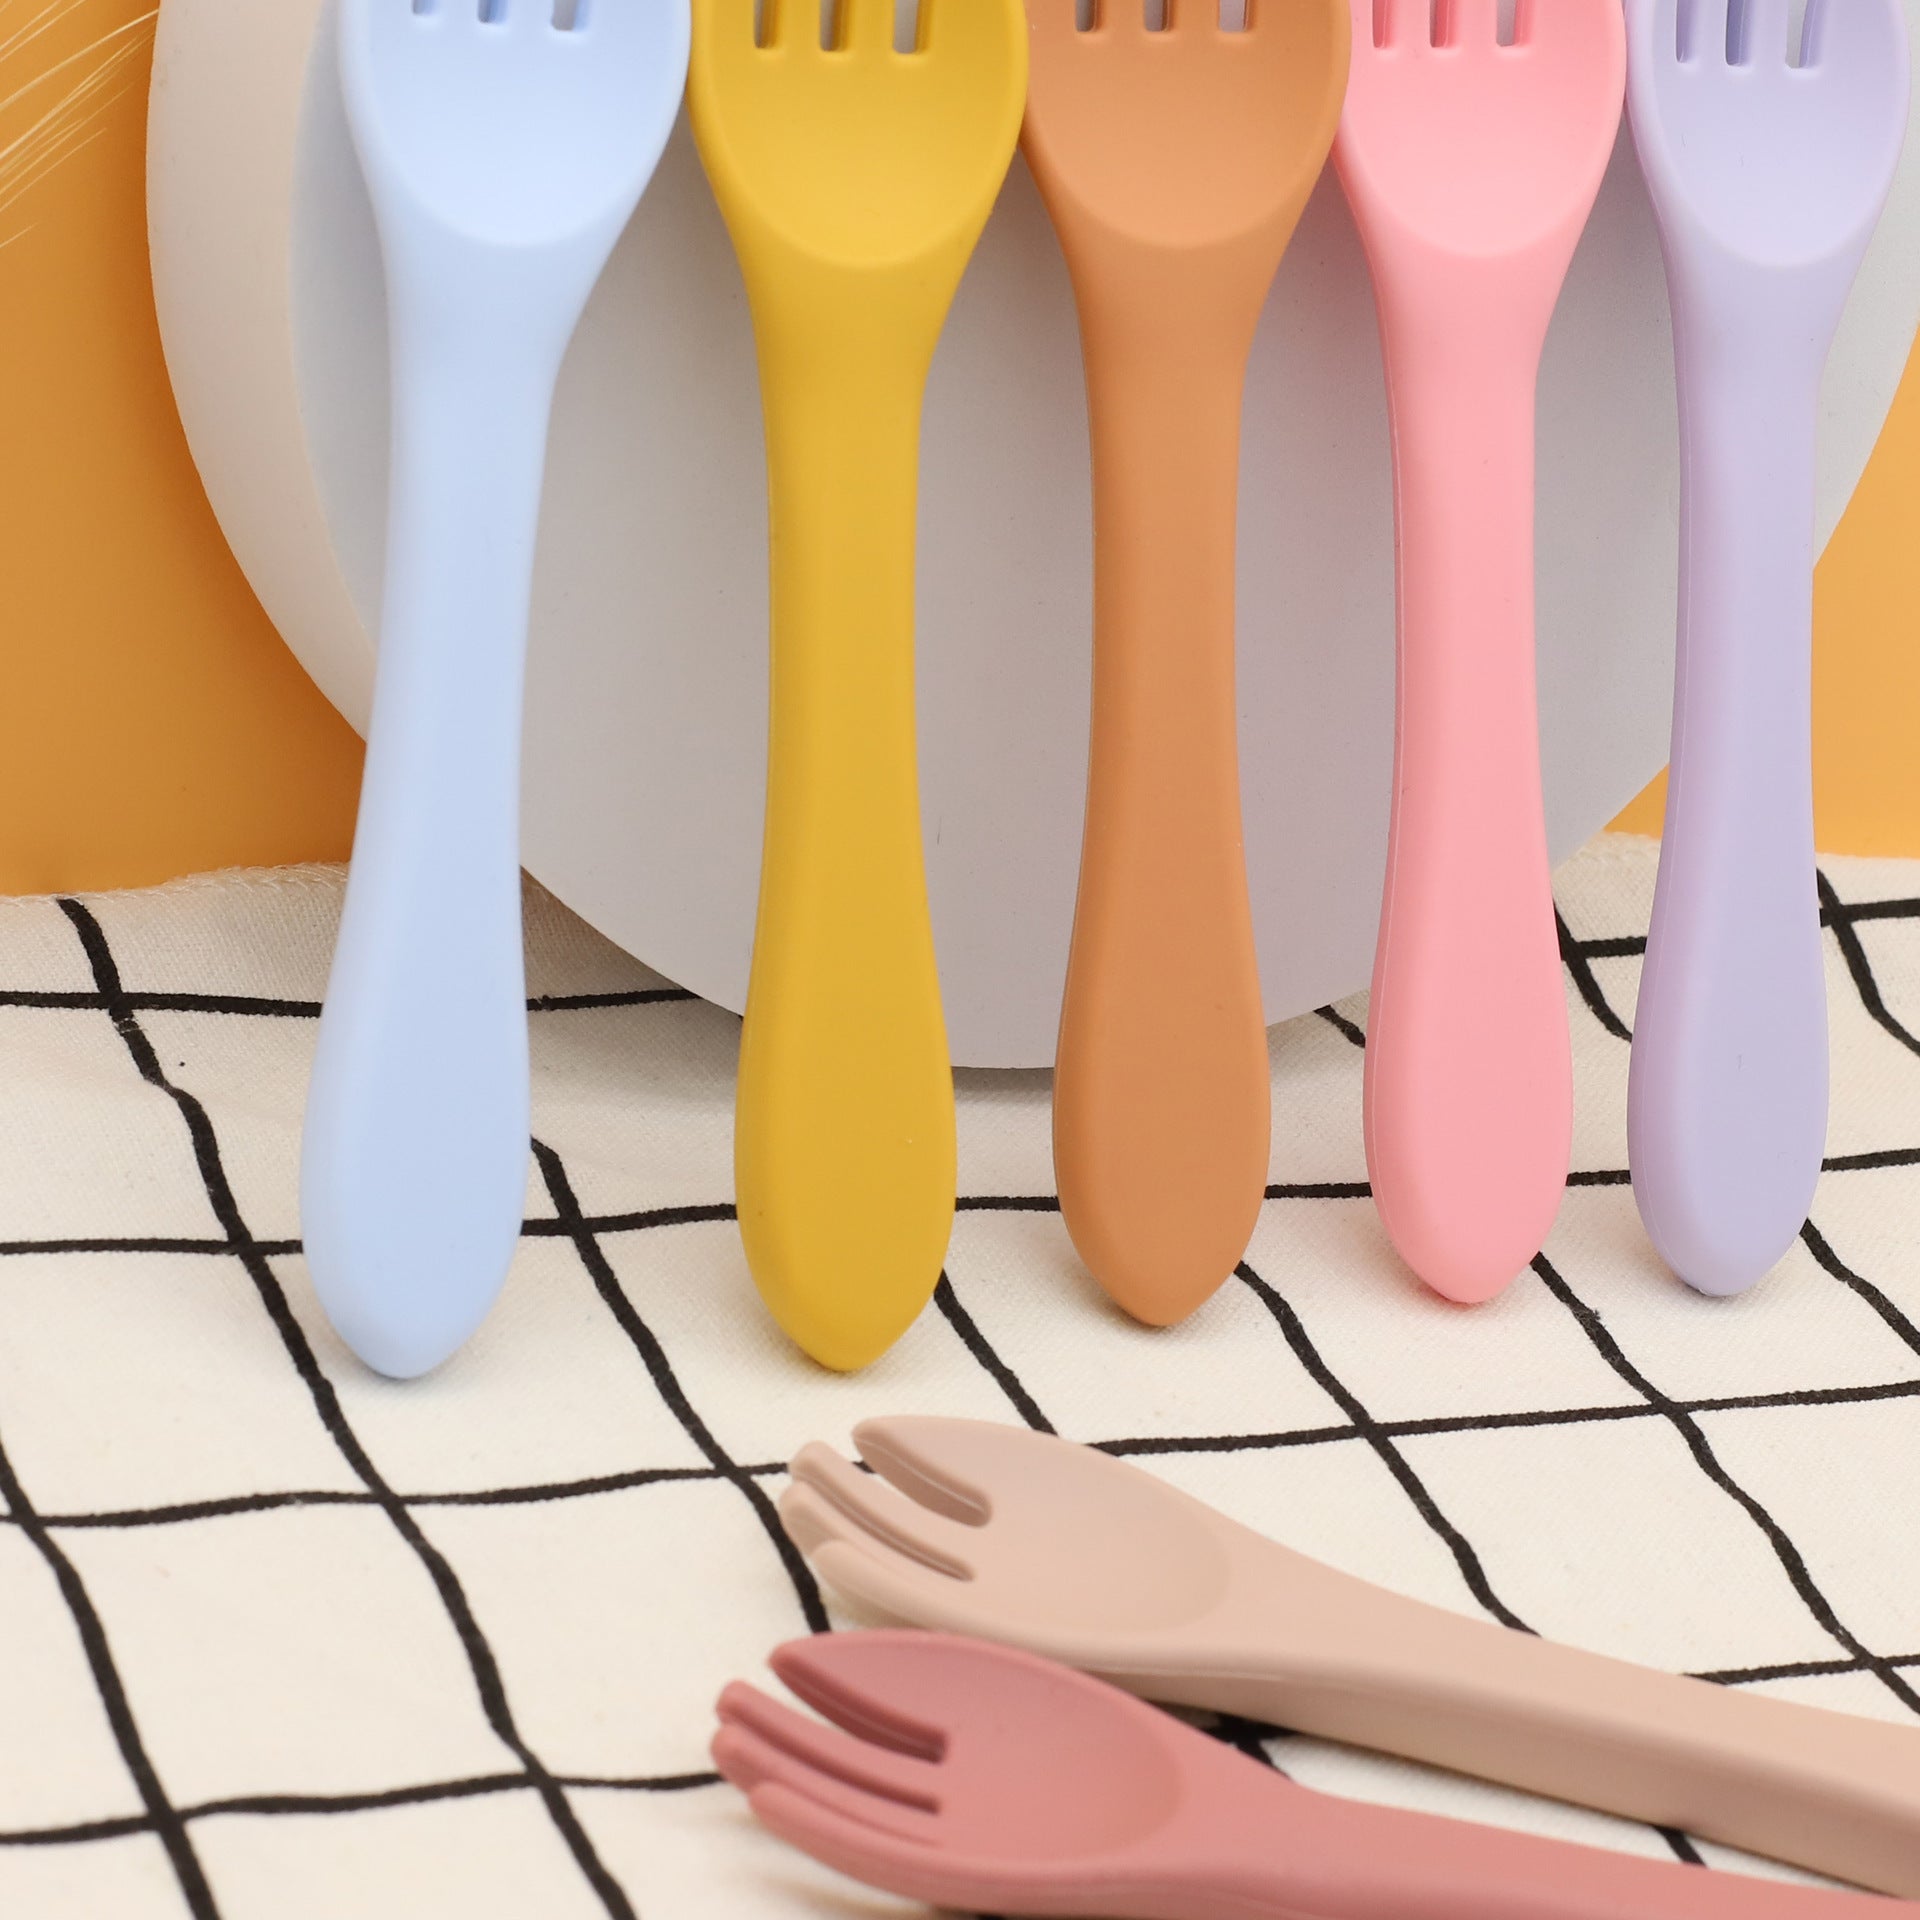 Baby Food Grade Complementary Food Training Silicone Spoon Fork Sets –  MyKids-USA™